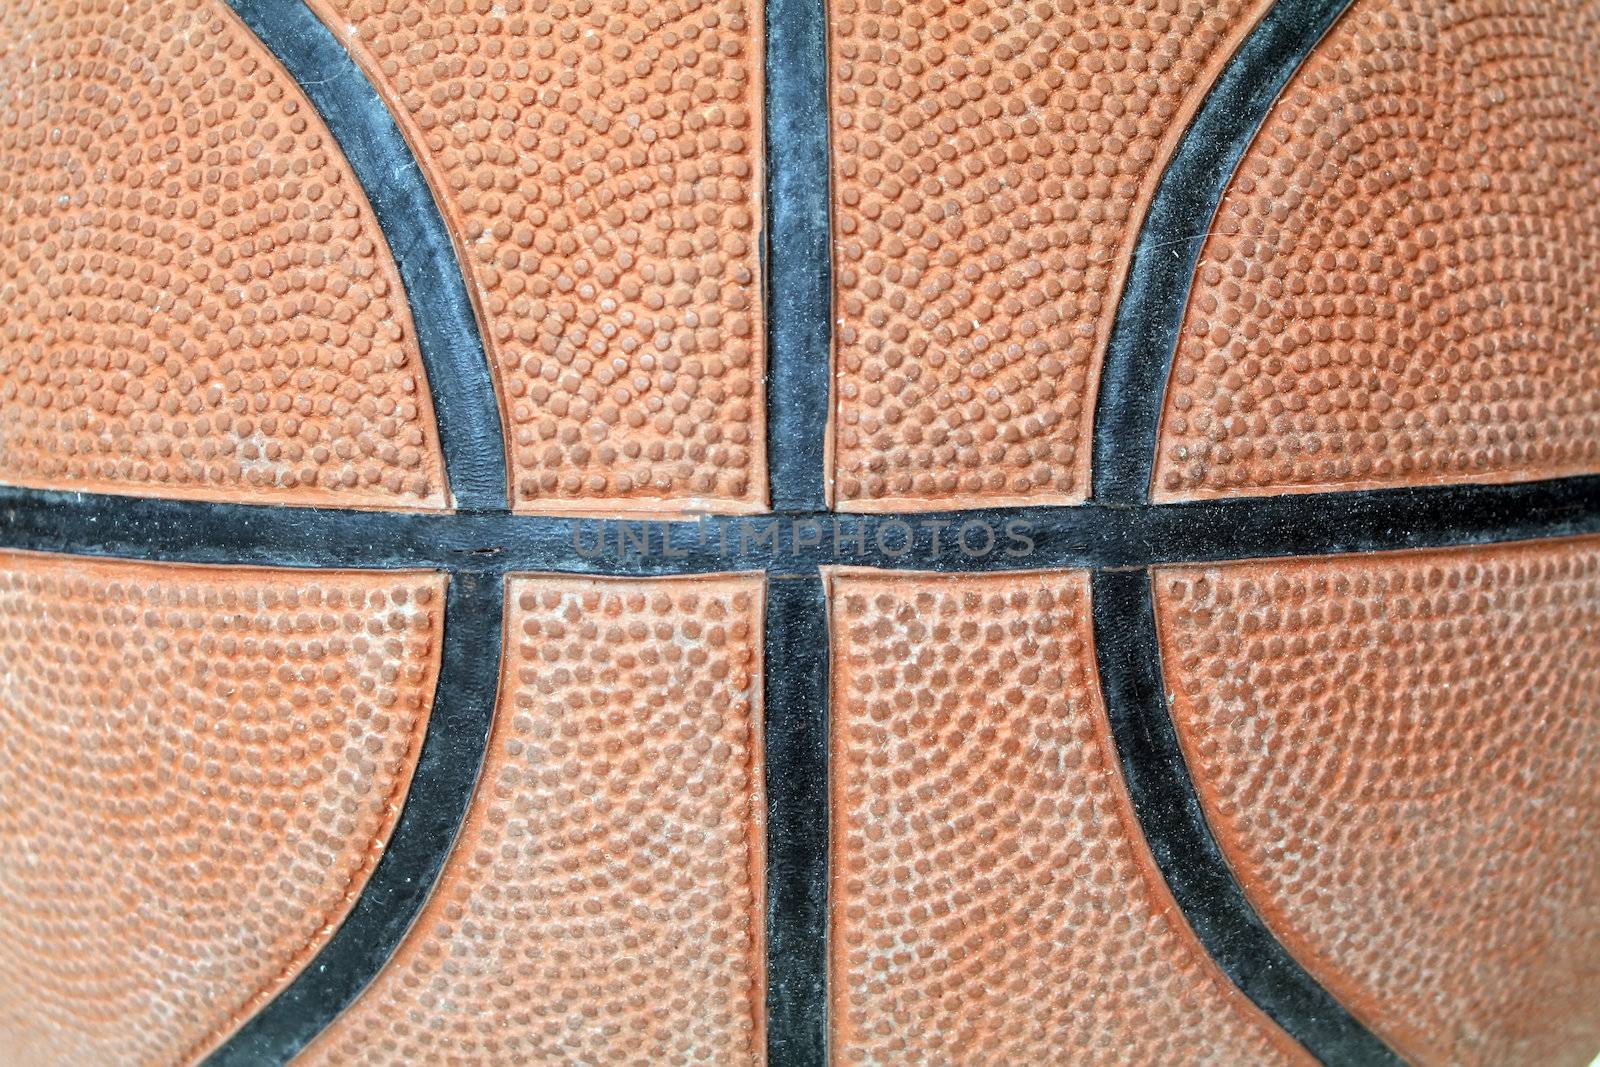 leather textured basketball background